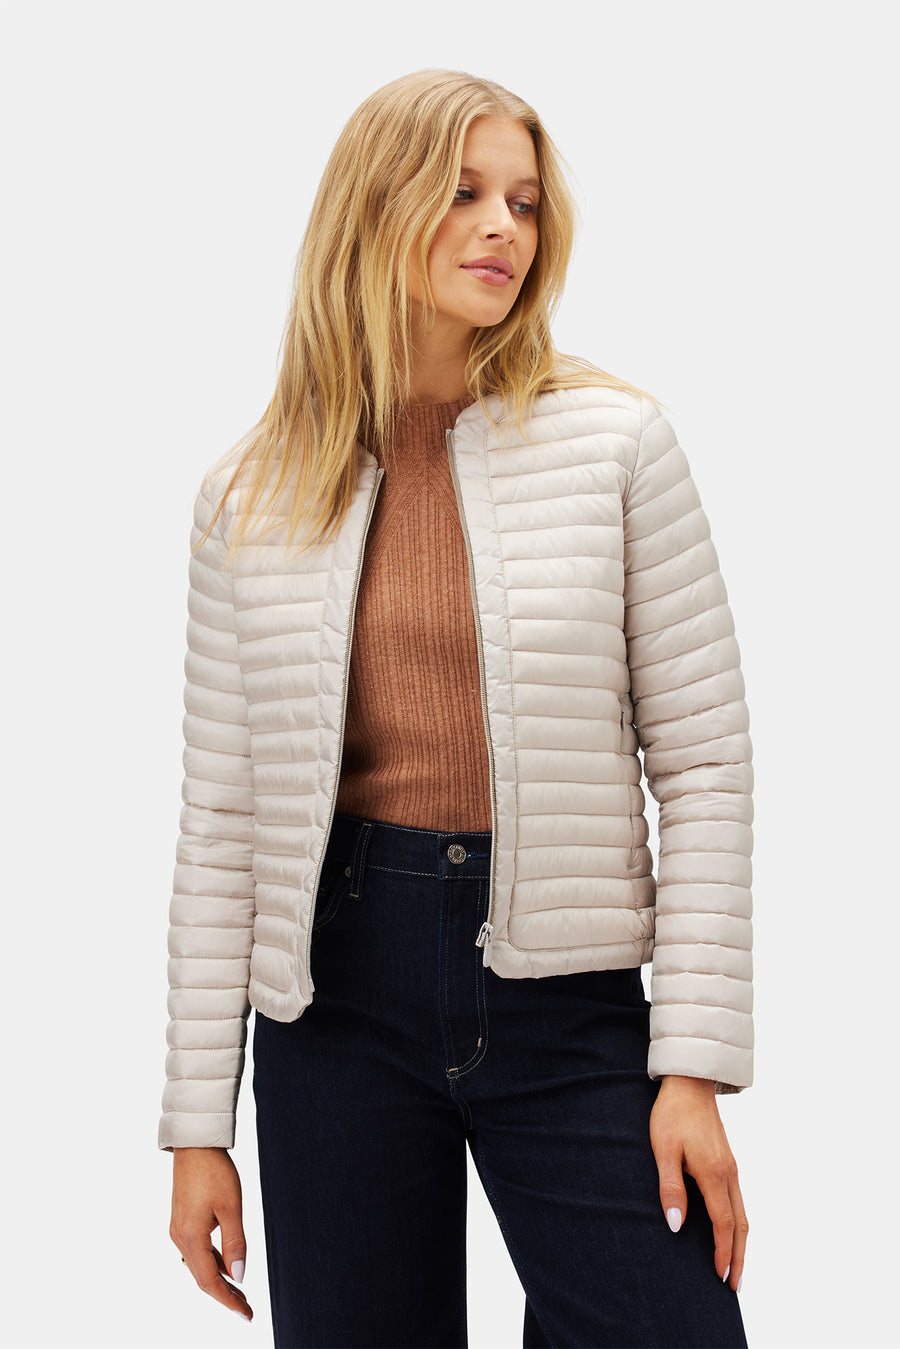 Save The Duck Carina Puffer Jacket - Sand Beige